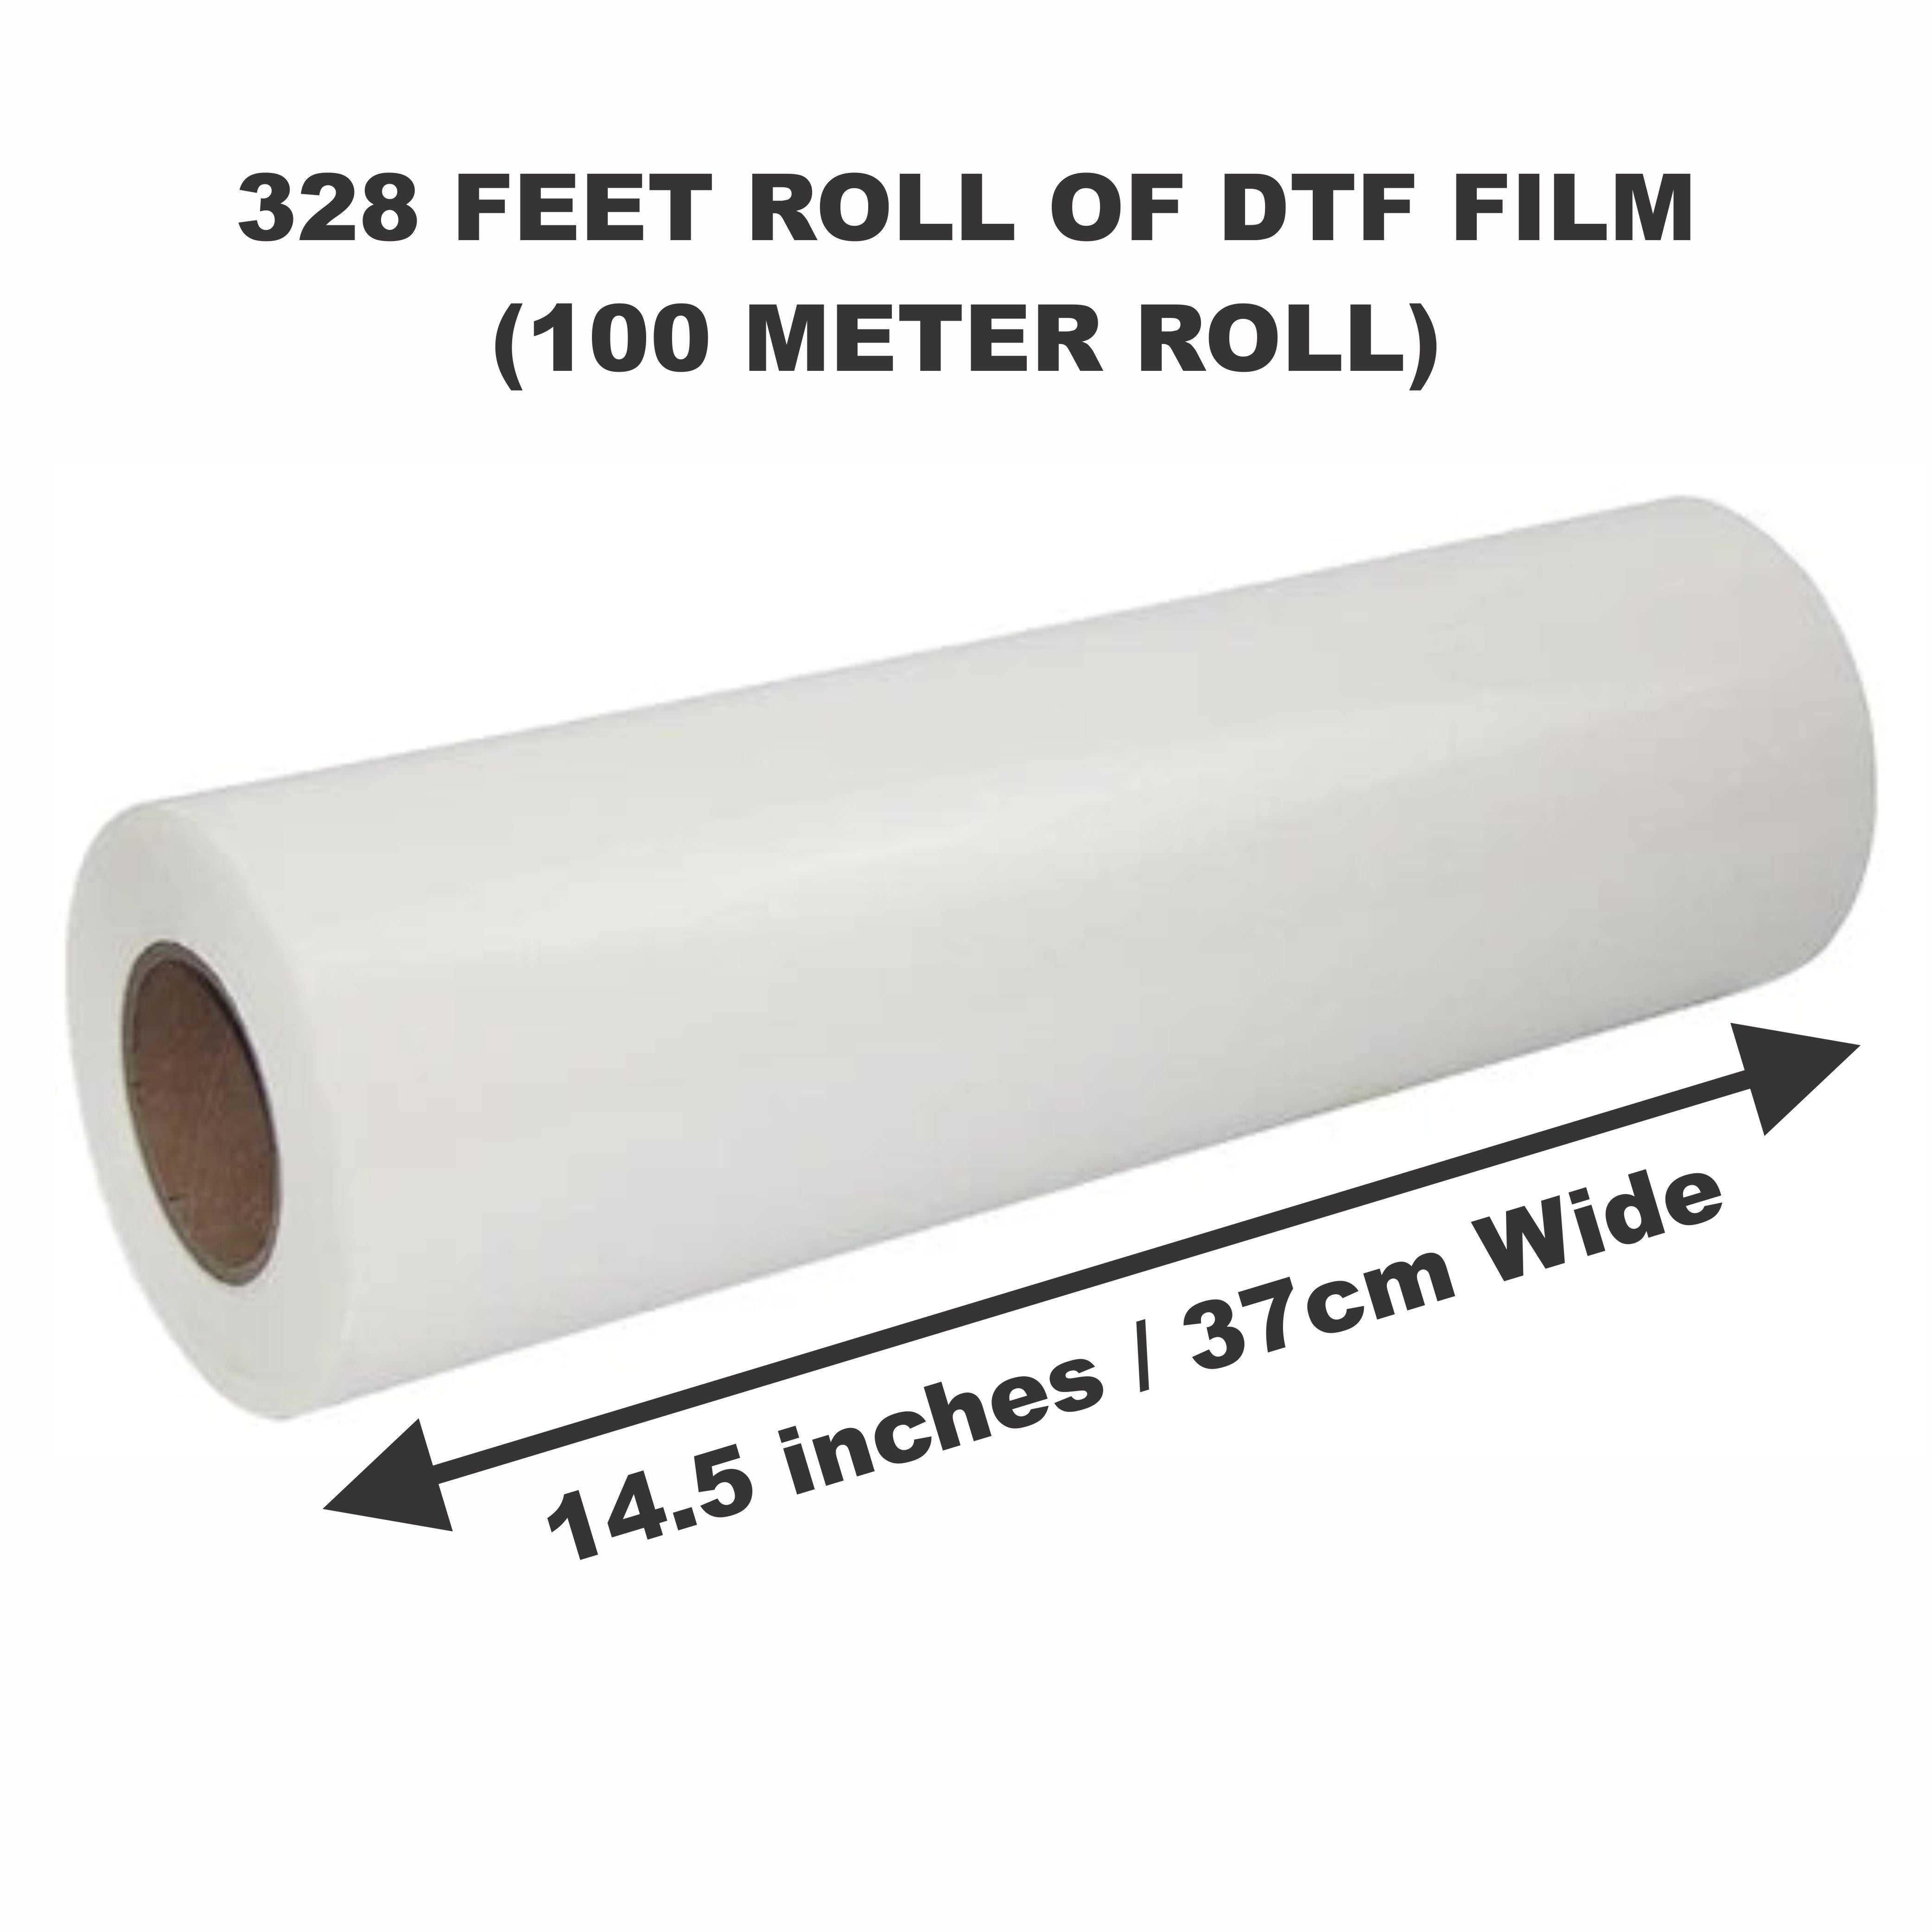 14.5” x 328 Feet Roll Of DTF Film - Double Sided Cold Peel